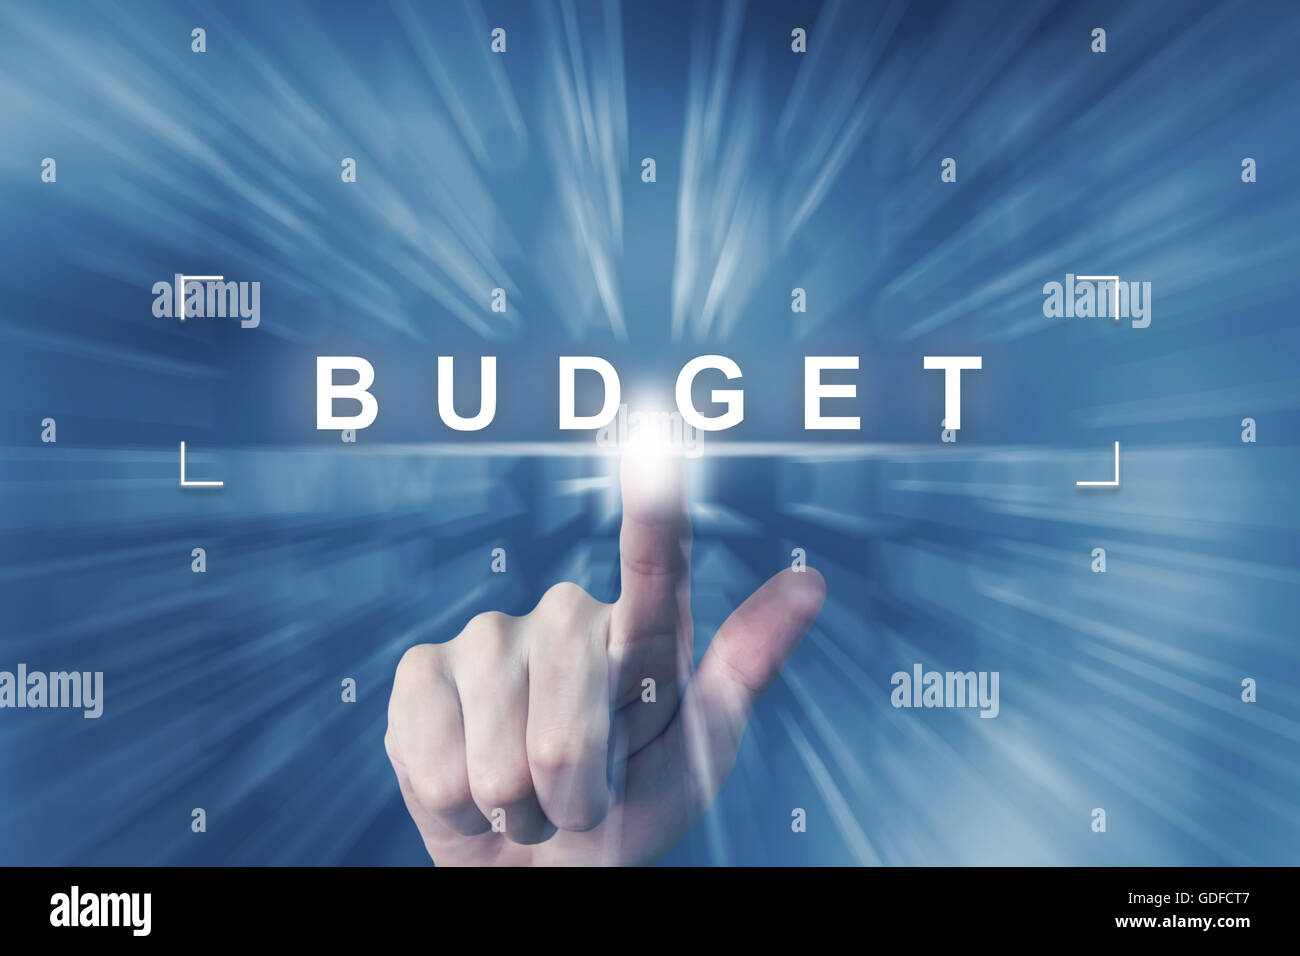 hand clicking on budget button with zoom effect background Stock Photo